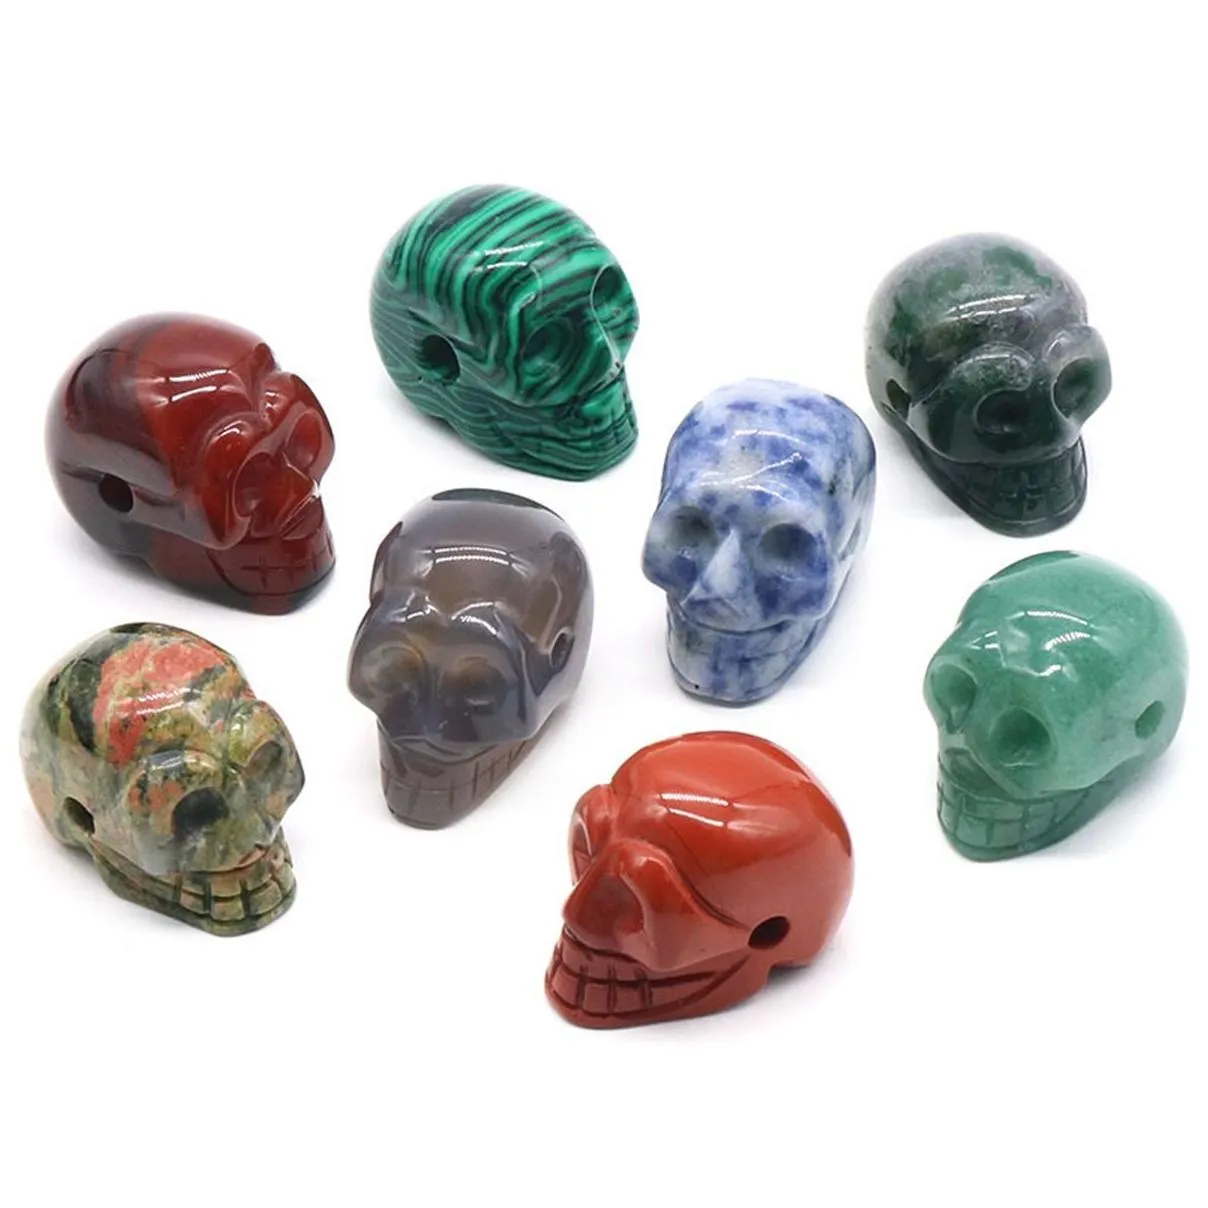 23mm Natural Turquoise Stone Skull Hand Carved Human Skull Head Sculpture Gemstone Carving